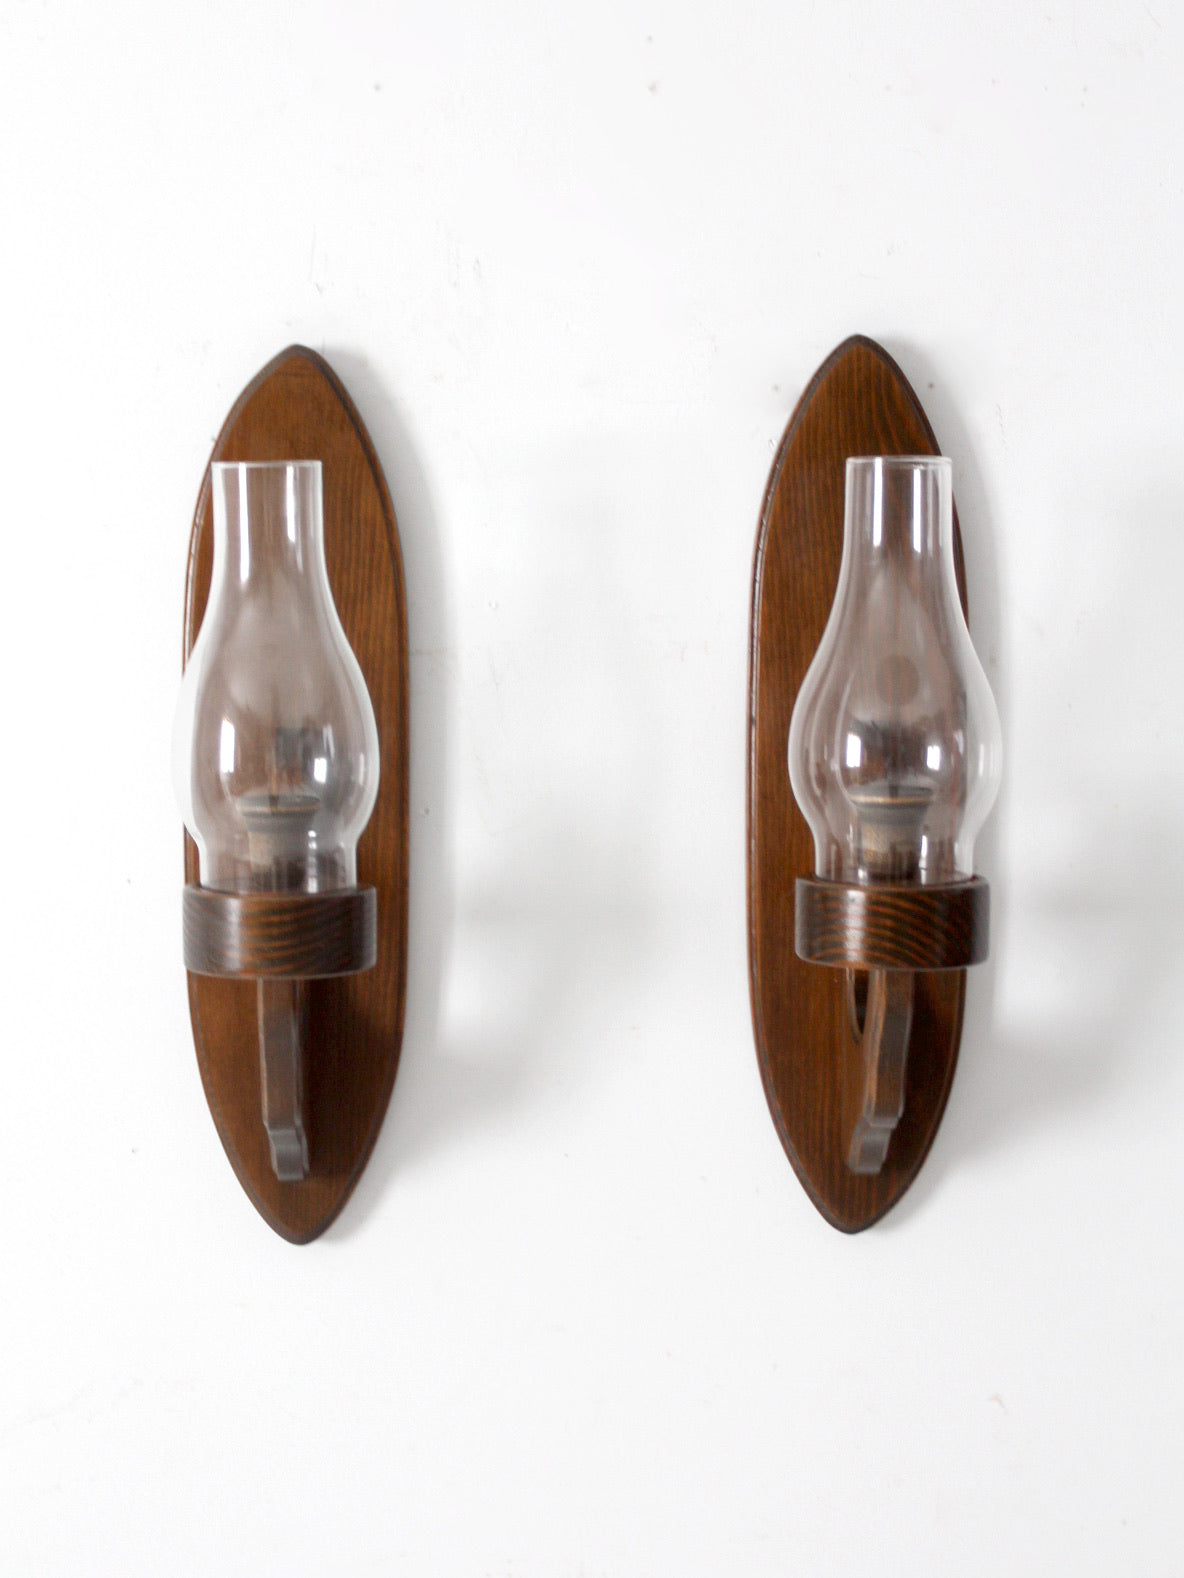 vintage hurricane glass with wood candle sconces pair